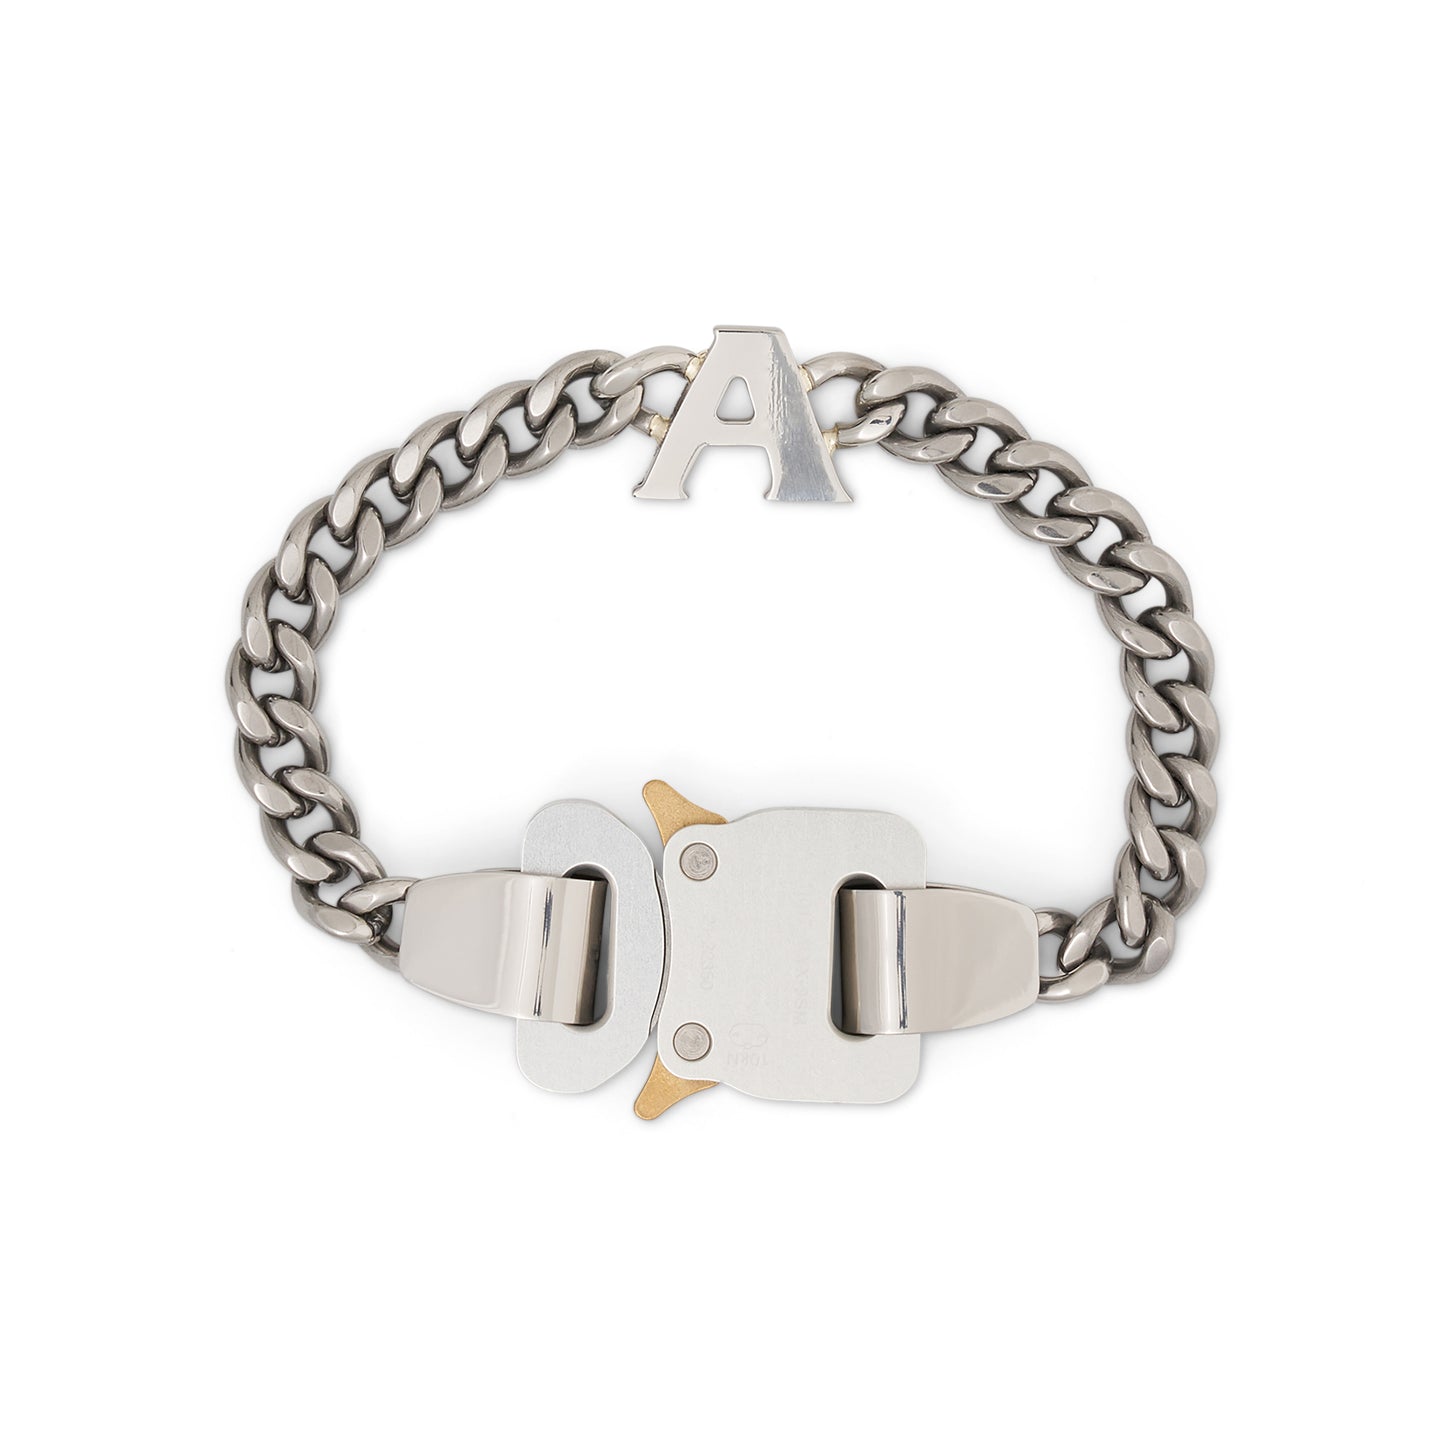 Buckle Bracelet with Charm in Silver